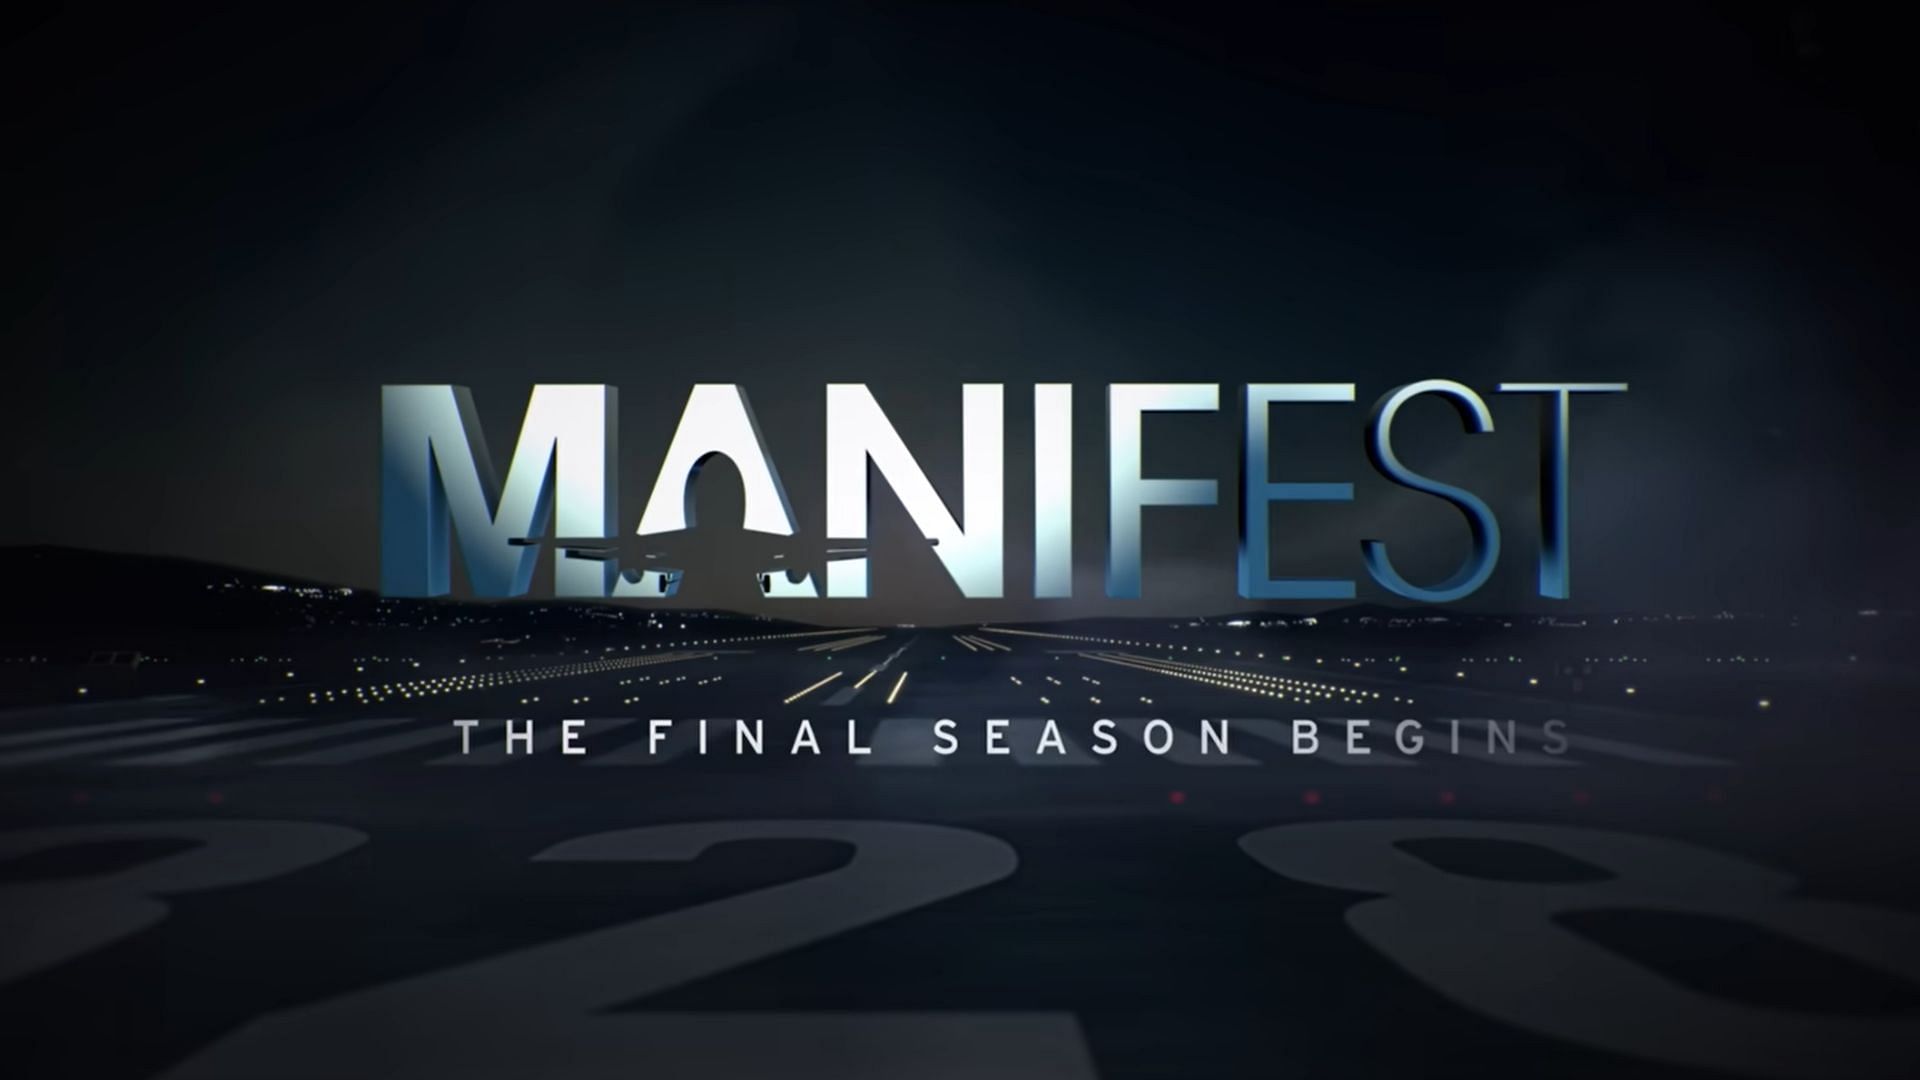 Part 2 of Manifest season 4 is coming in summer 2023